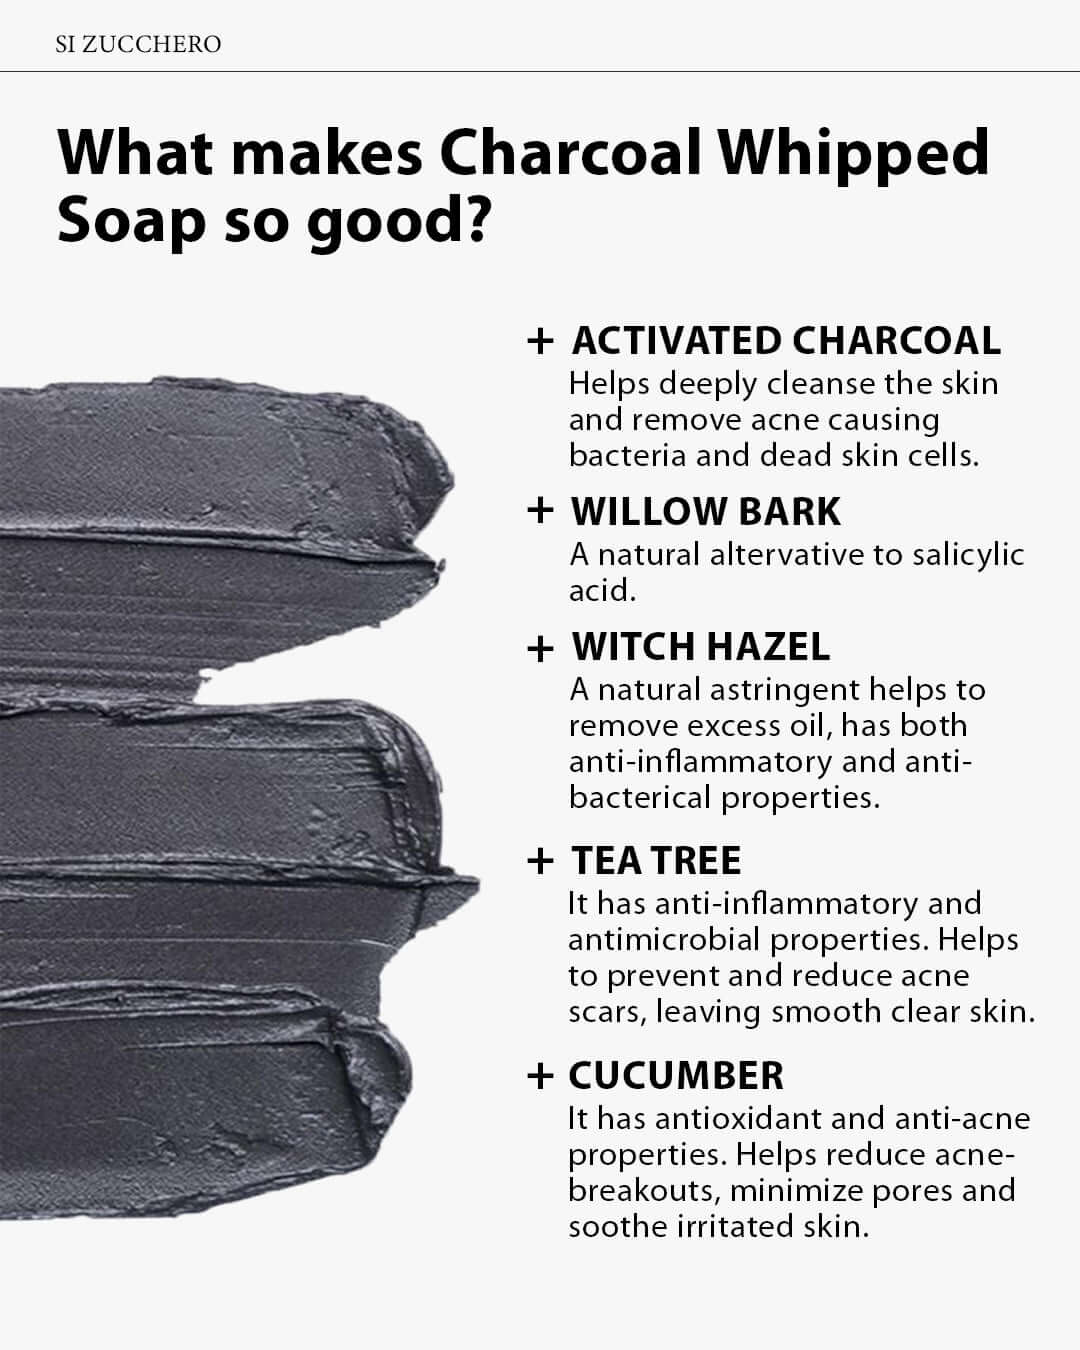 Charcoal whipped soap benefits